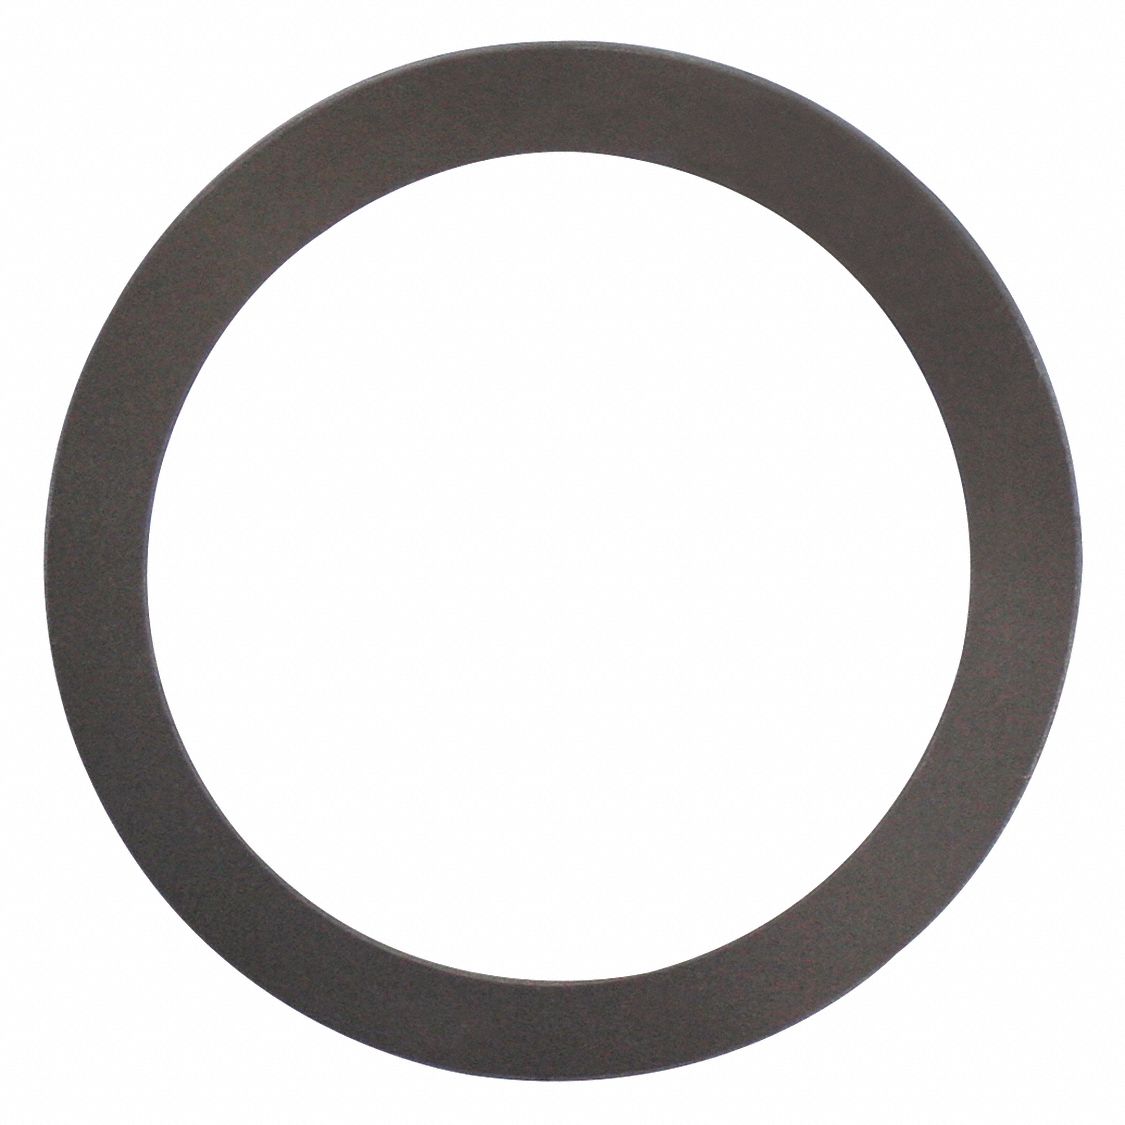 Gasket: 2 in Tube Size, 1.8594 in Inside Dia., 2.375 in Outside Dia., 3/32 in Thick